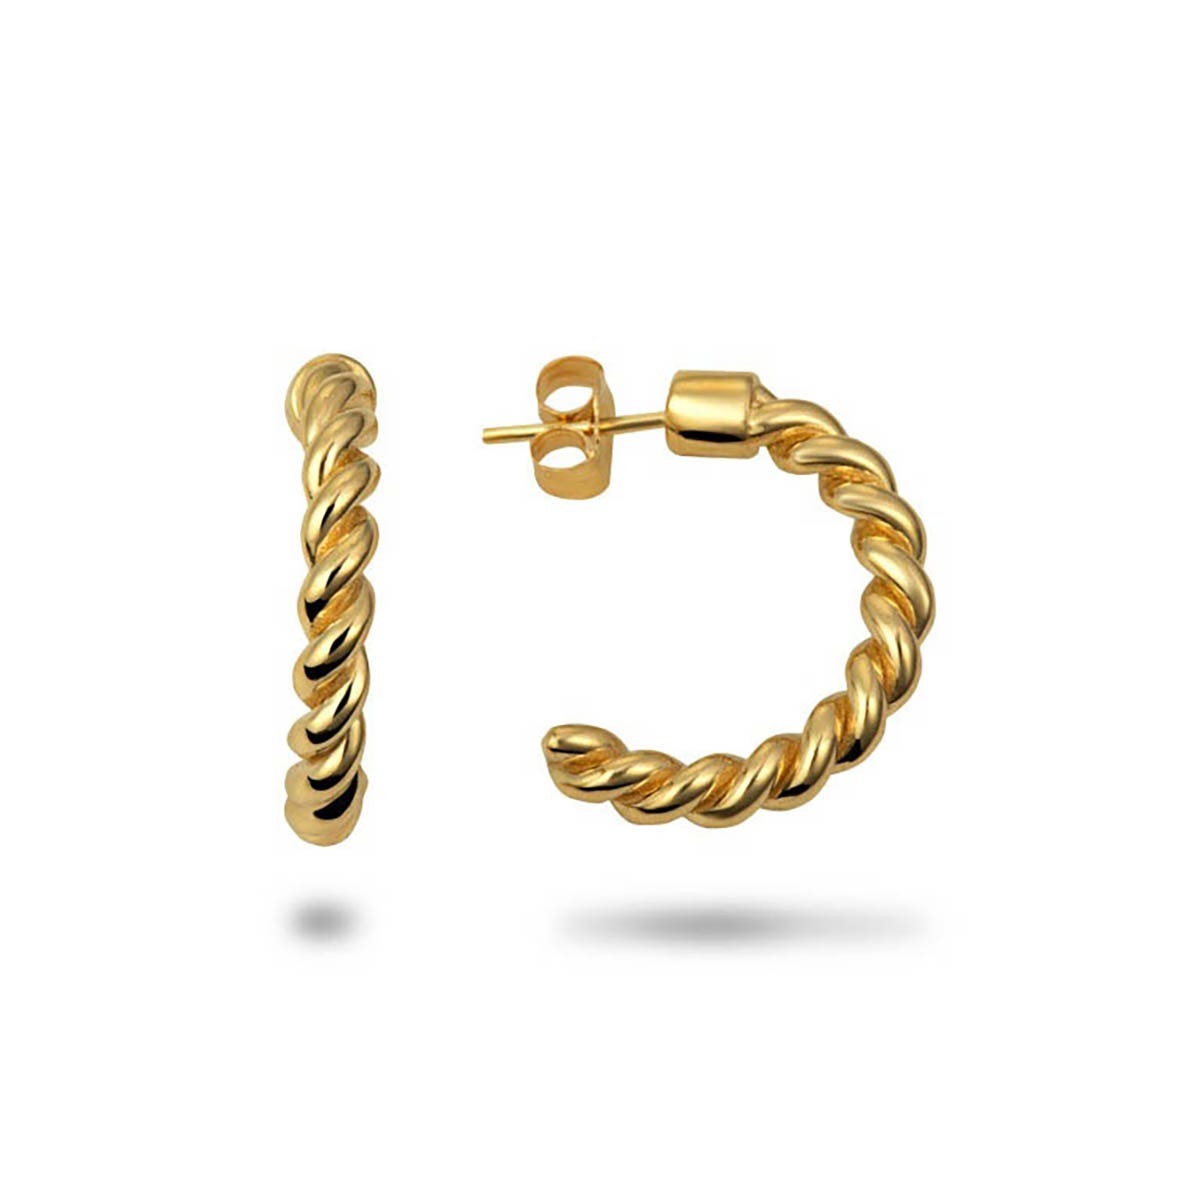 Gold Boutique Man Earrings in Gold GOOFASH